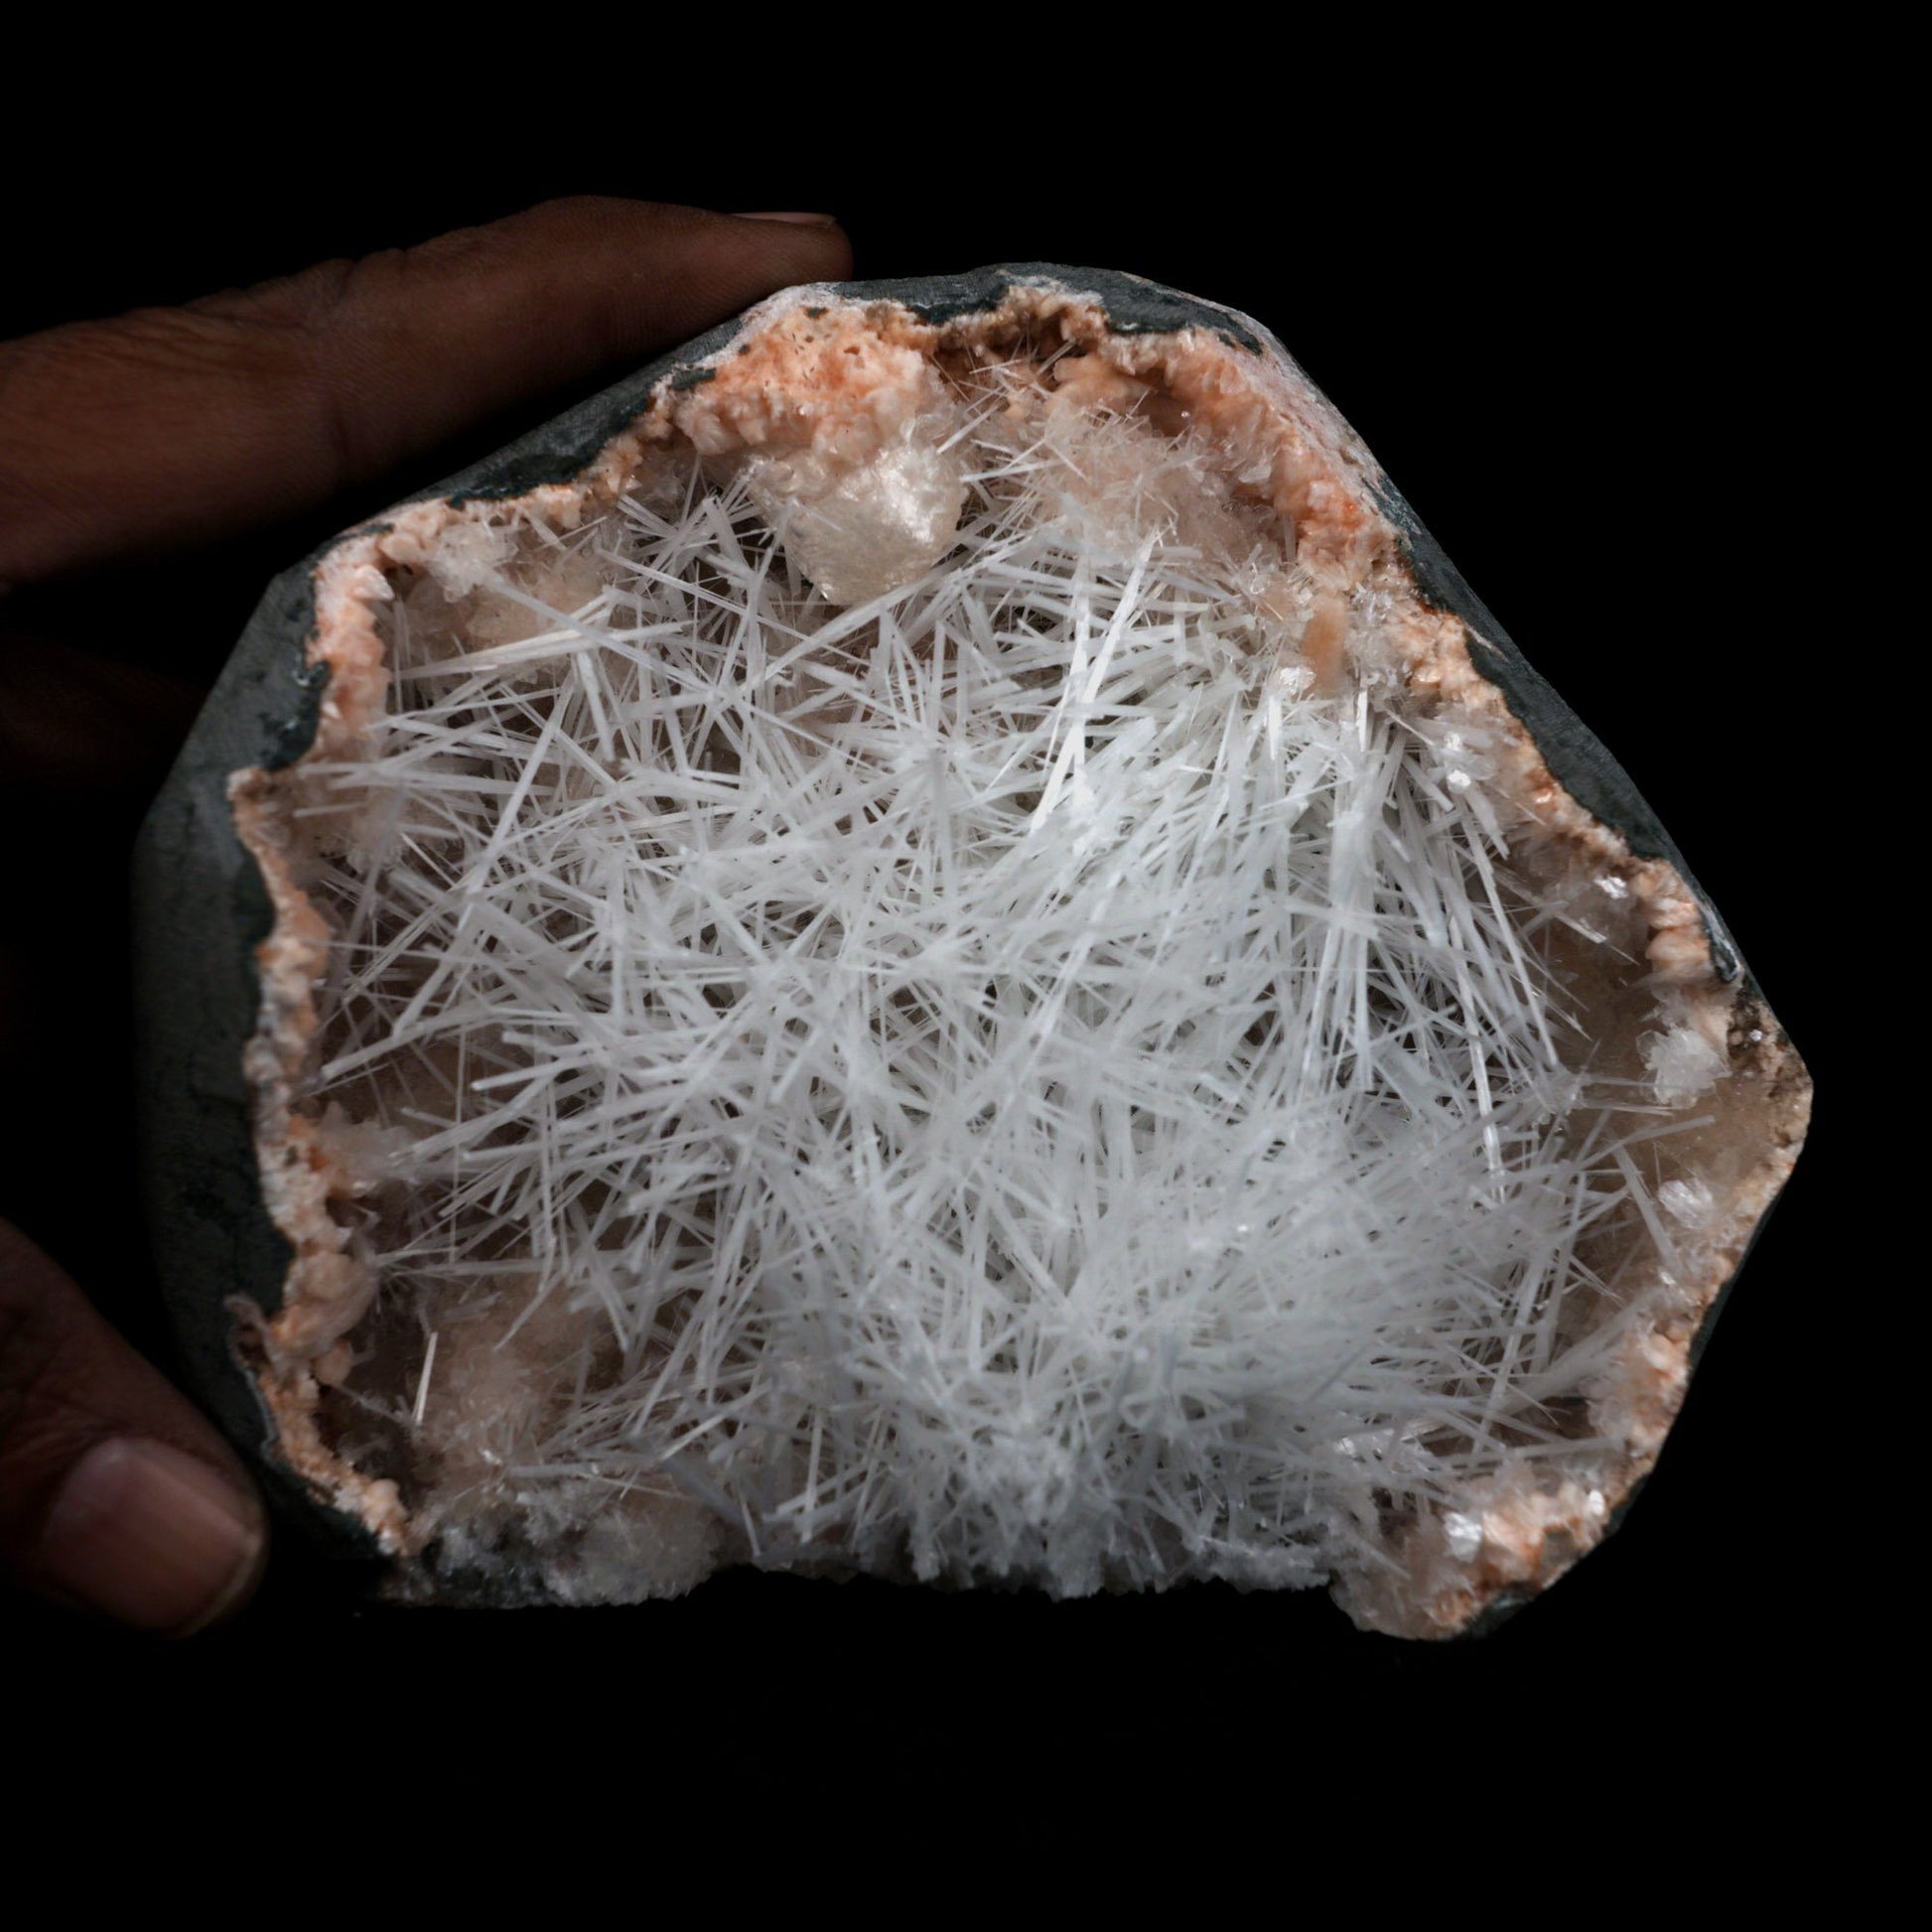 Scolecite Sprays On Heulandite With Stilbite Geode Natural Mineral Spe… https://www.superbminerals.us/products/scolecite-sprays-on-heulandite-with-stilbite-geode-natural-mineral-specimen-b-4904 Features: Scolecite crystals are interspersed throughout a very large Geode that is lined with beige Heulandite crystals. The sprays of Scolecite crystals are glossy, colourless, highly translucent, acicular (needle-like) in shape. The crystal creation is a work of art in and of itself.